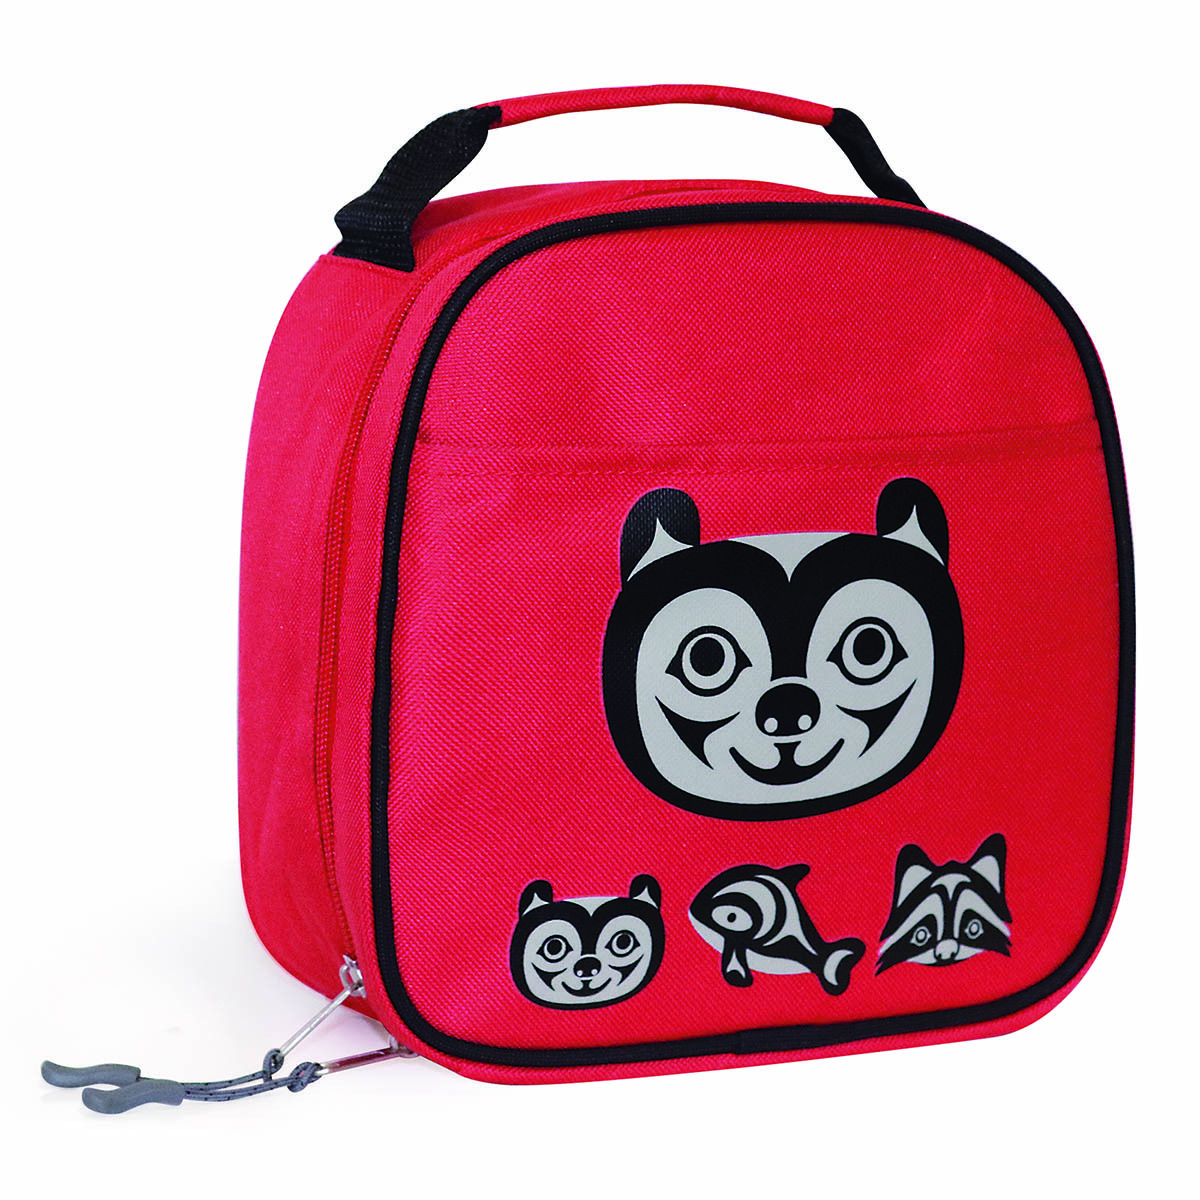 Kids Lunch Bag – Canadian Museum of History Boutique